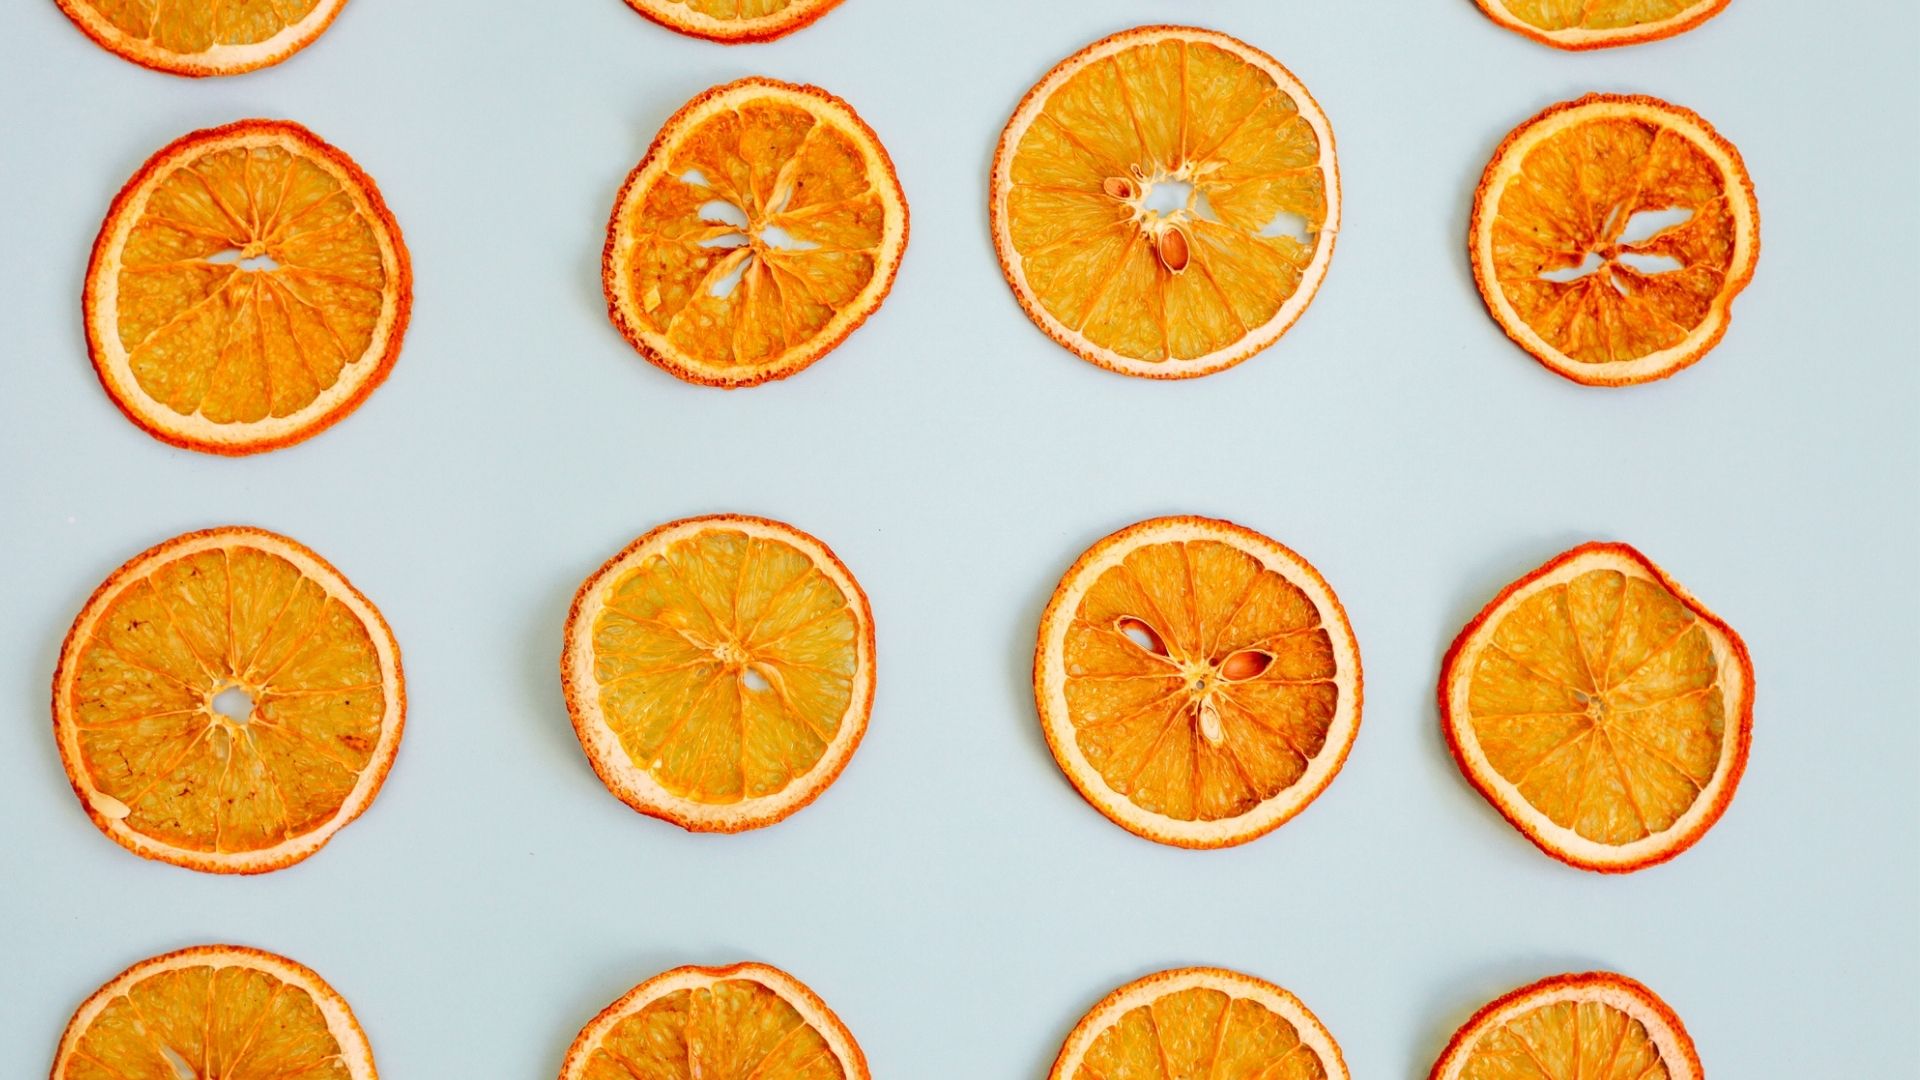 Slices of orange that have been dehydrated are on a grey background.